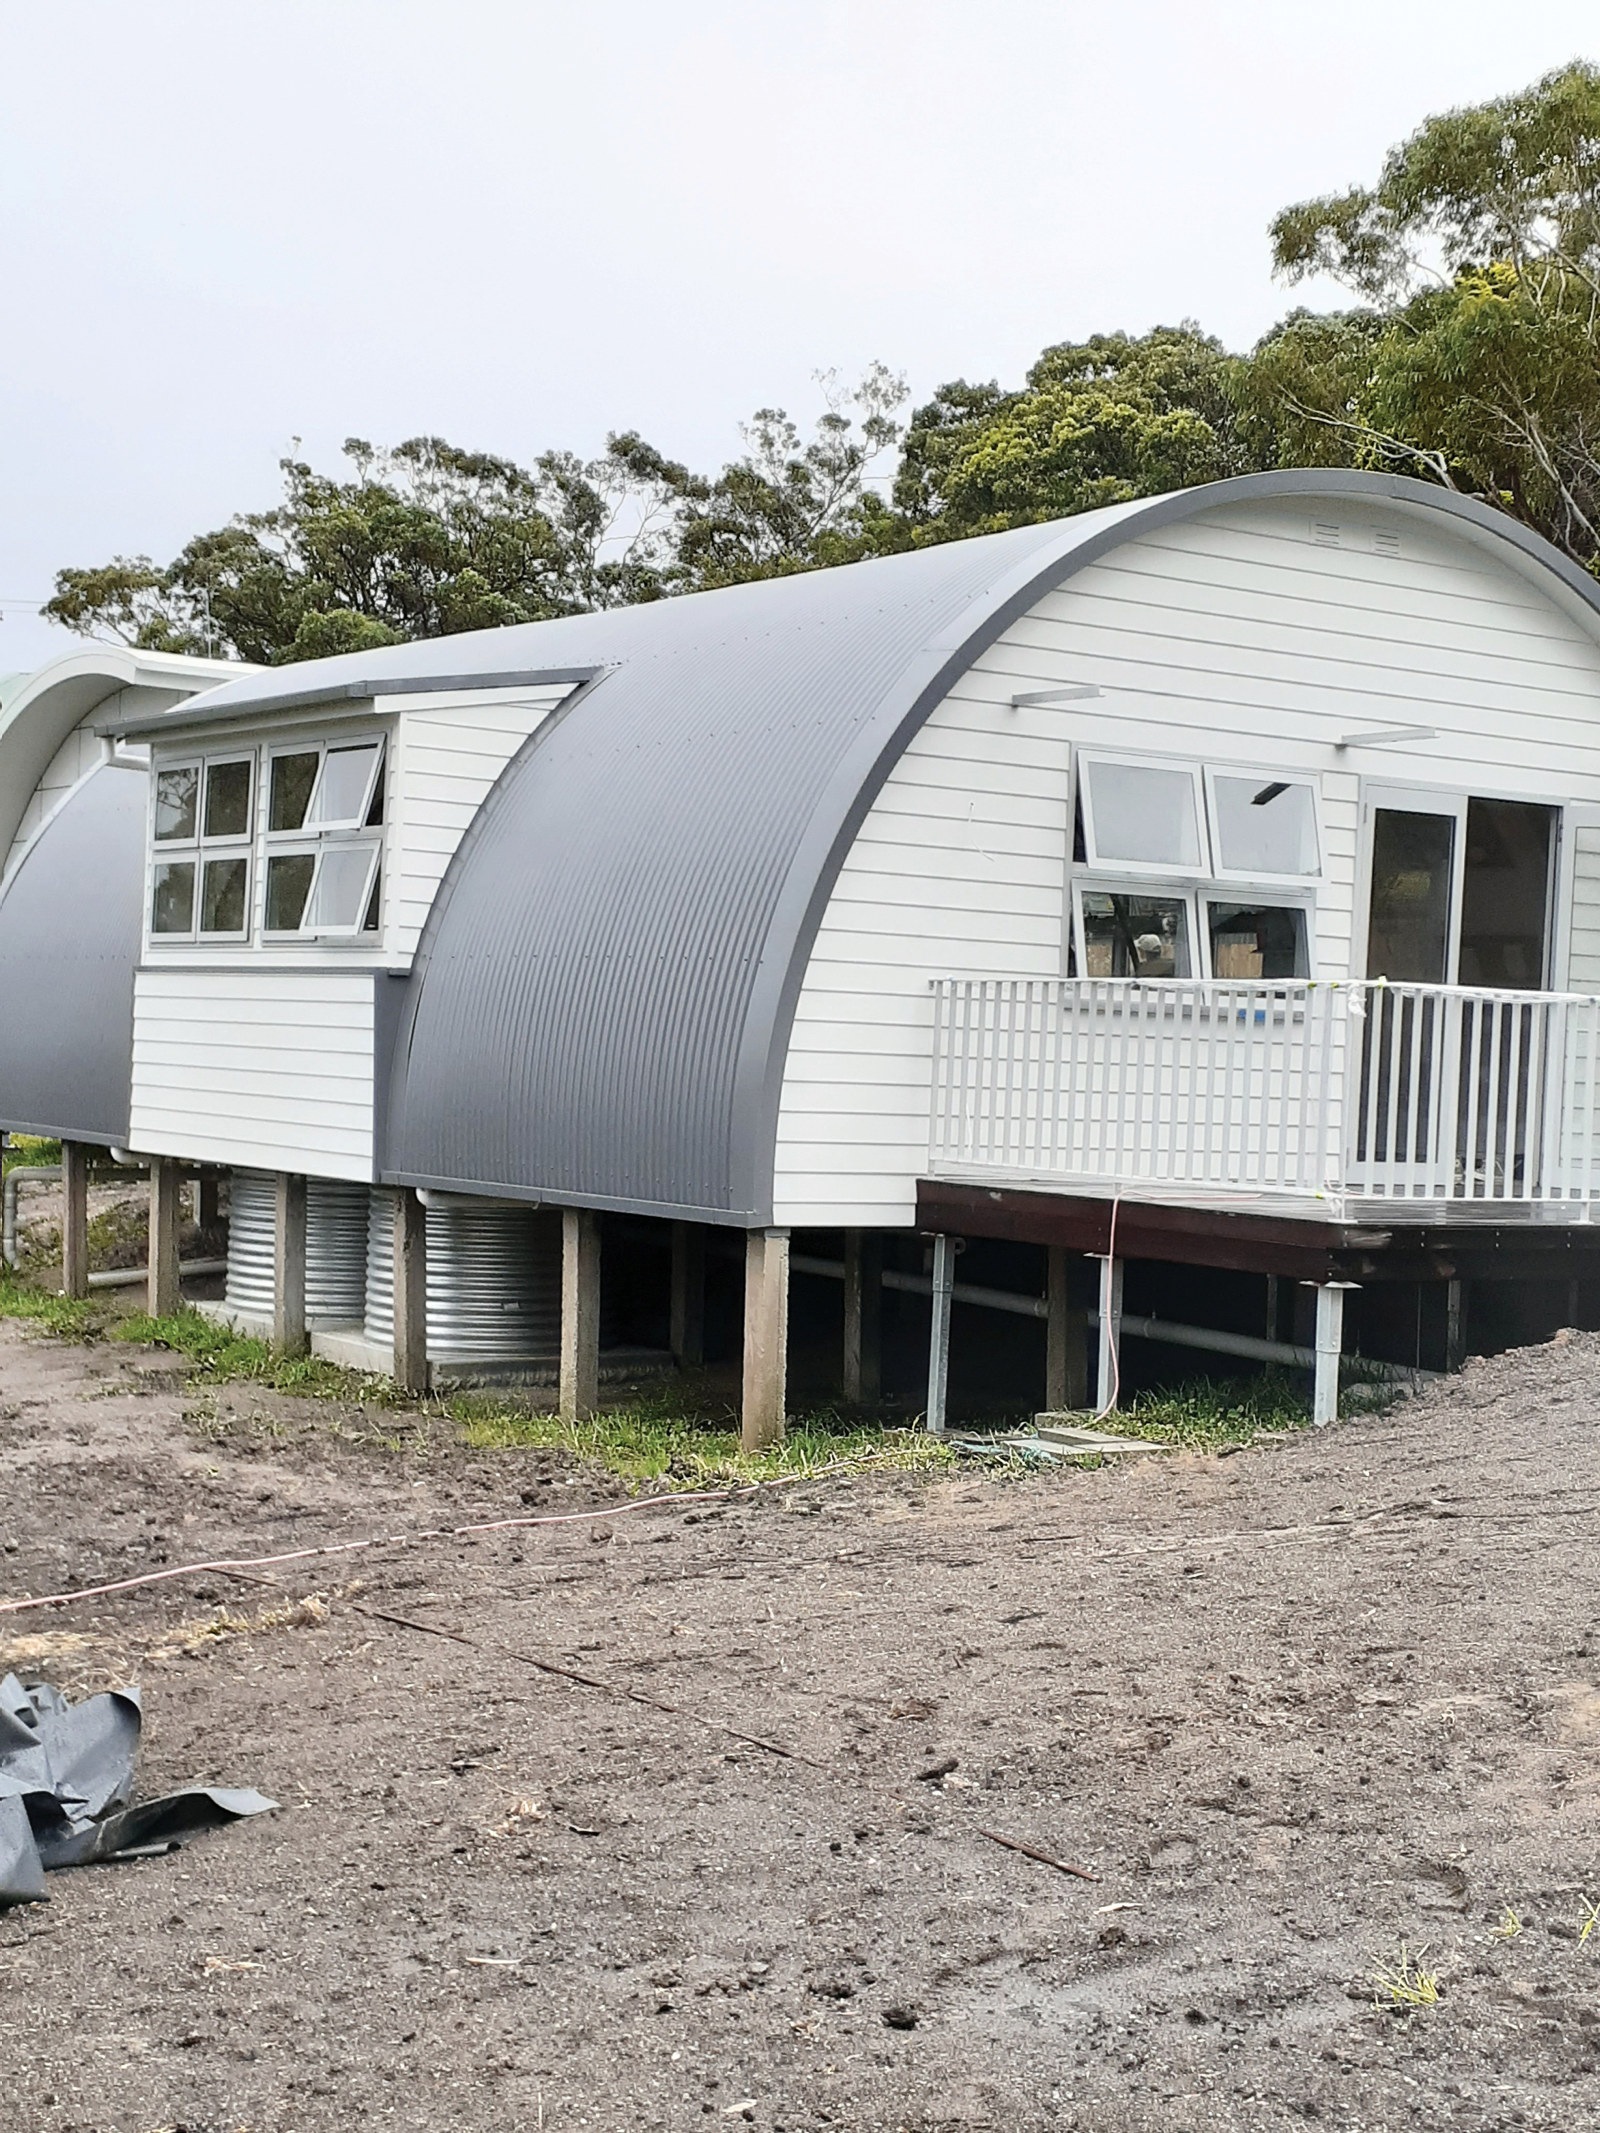 The conserved Nissen hut nearing completion.